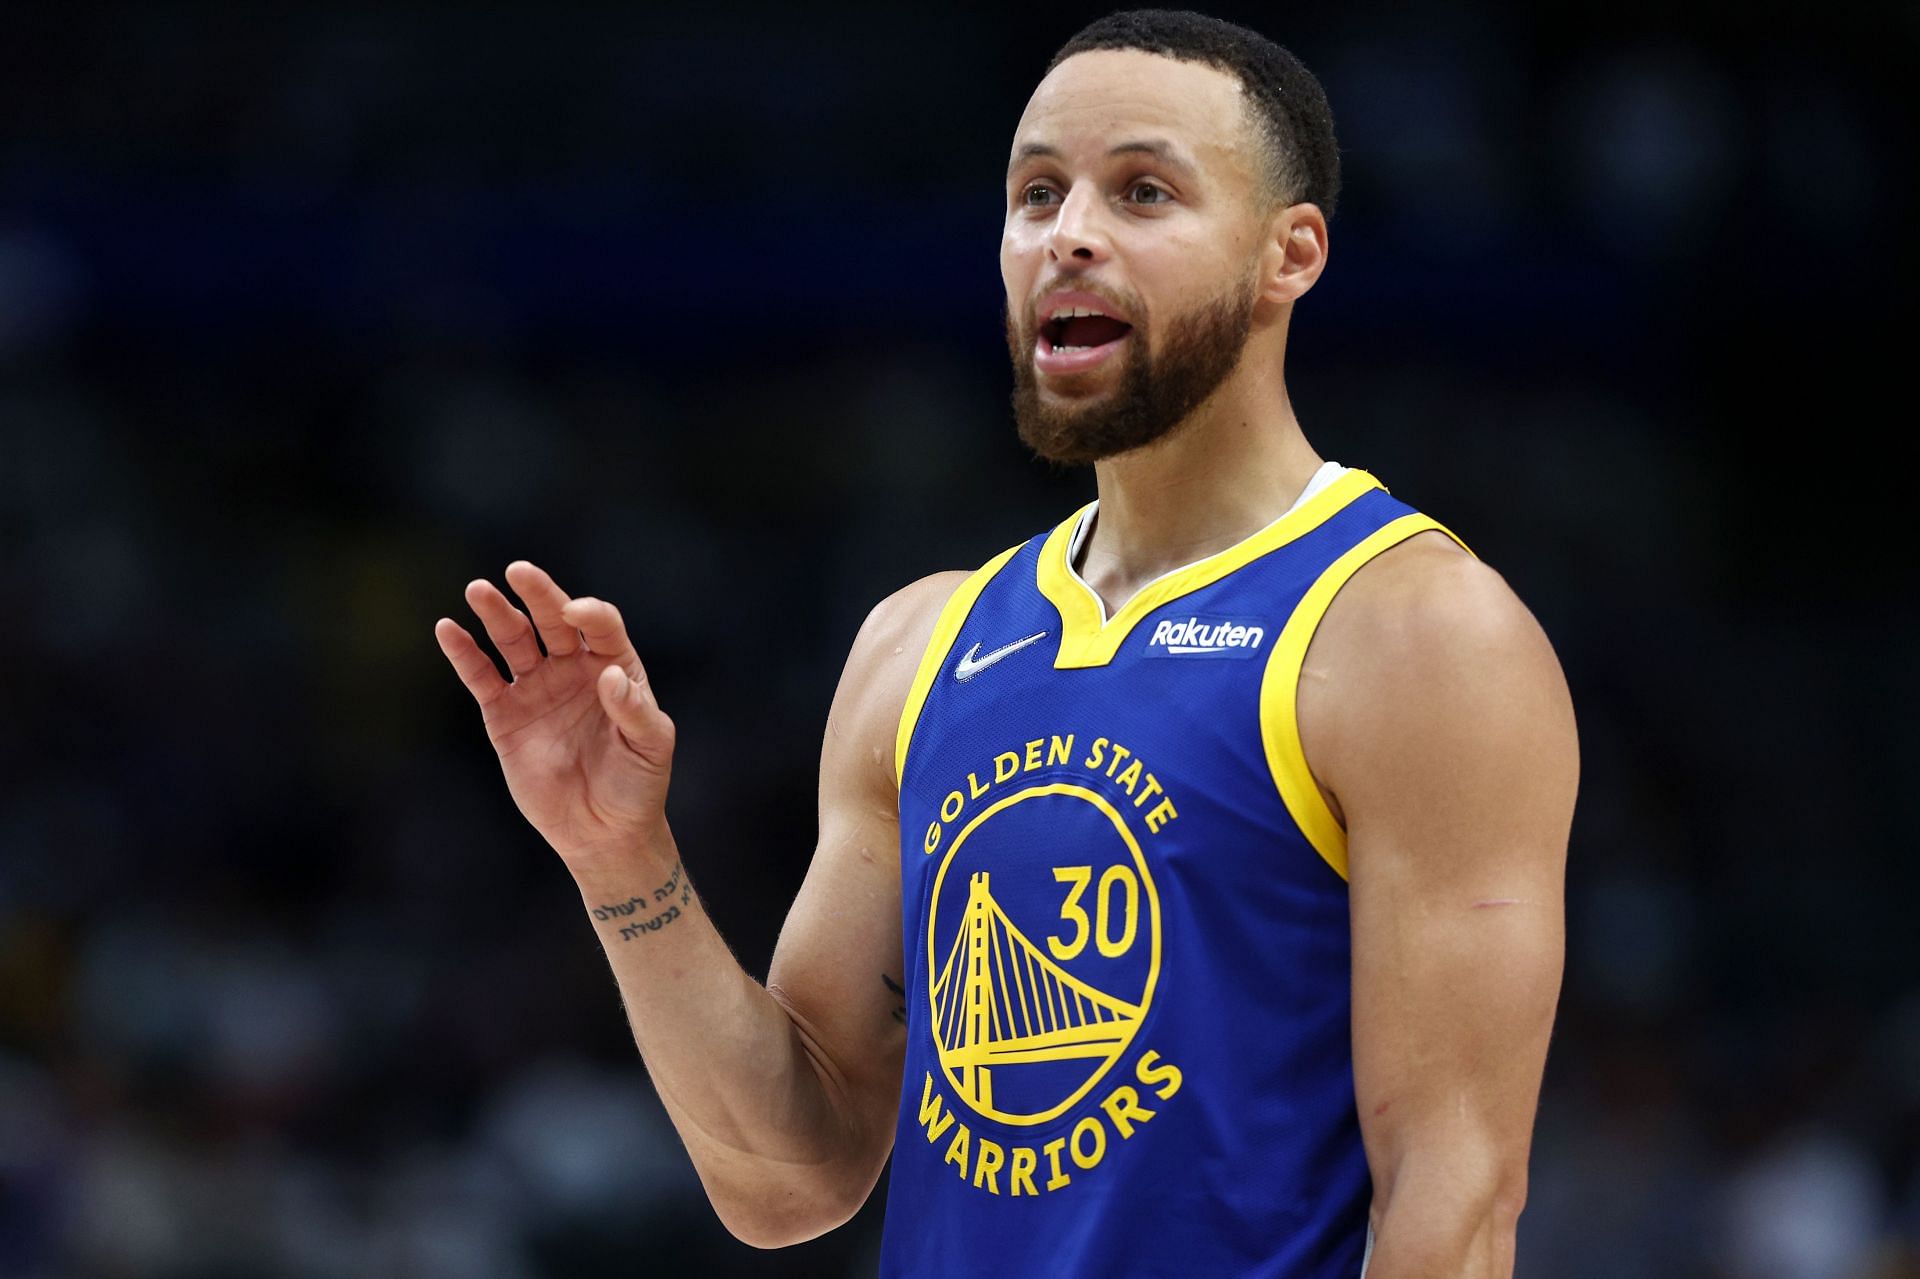 Stephen Curry of the Golden State Warriors in the 2022 NBA Western Conference Finals